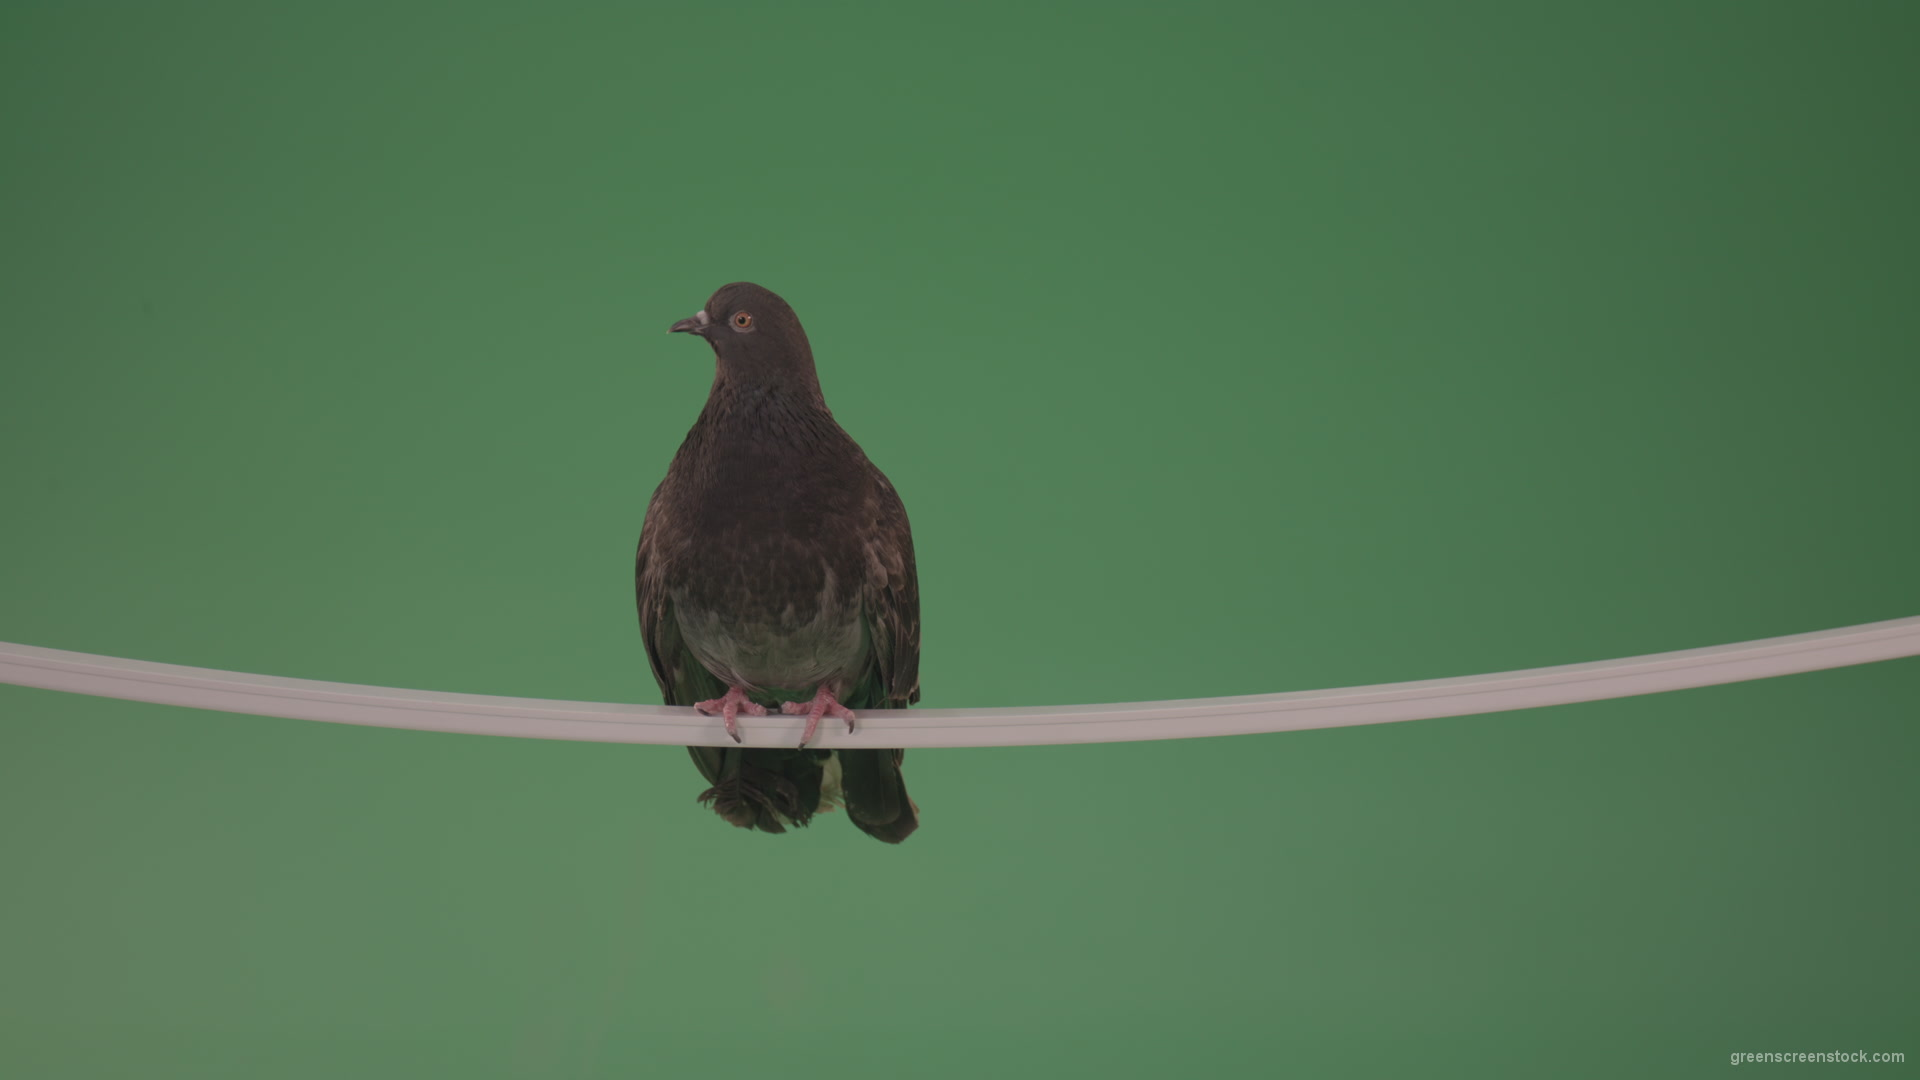 Beautiful-bird-of-doves-flew-to-explore-the-terrain-isolated-on-chromakey-background_008 Green Screen Stock